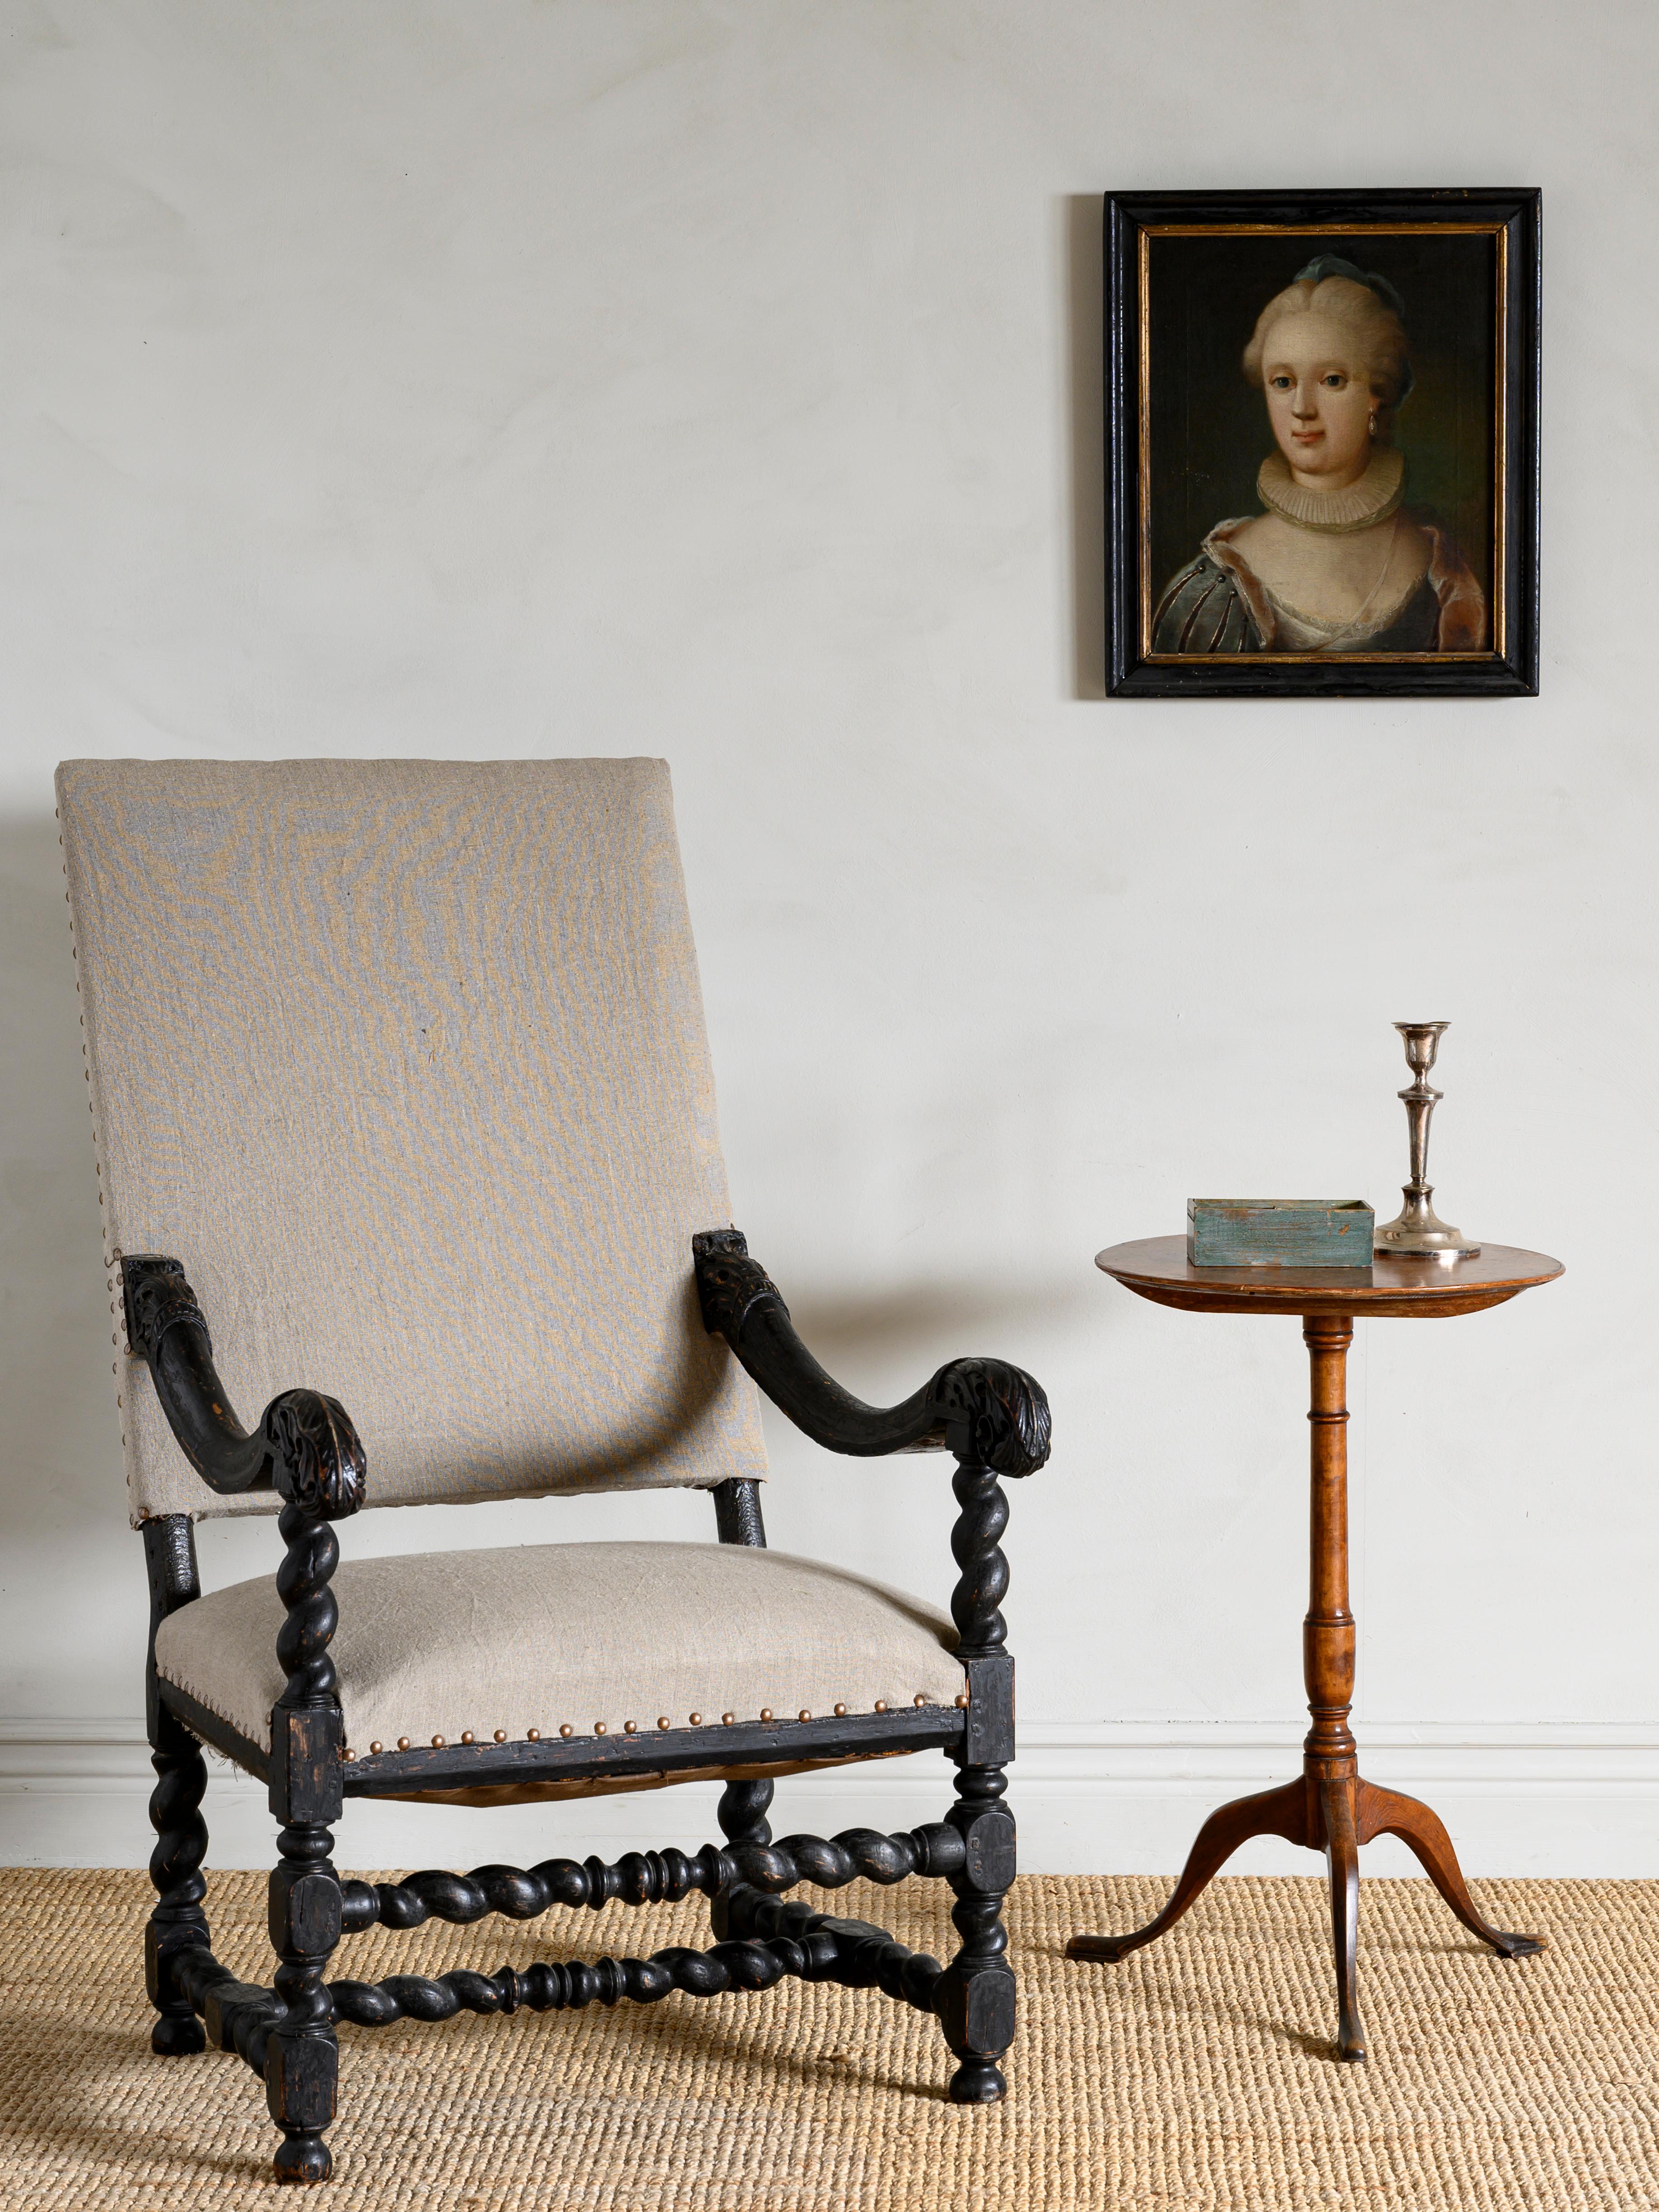 Impressive 18th century baroque armchair, Sweden, circa 1730.
Upholstered in raw linen.

Good condition with wear consistent with age and use. Historical secondary color. Structurally good and sturdy. A detailed condition report is available on